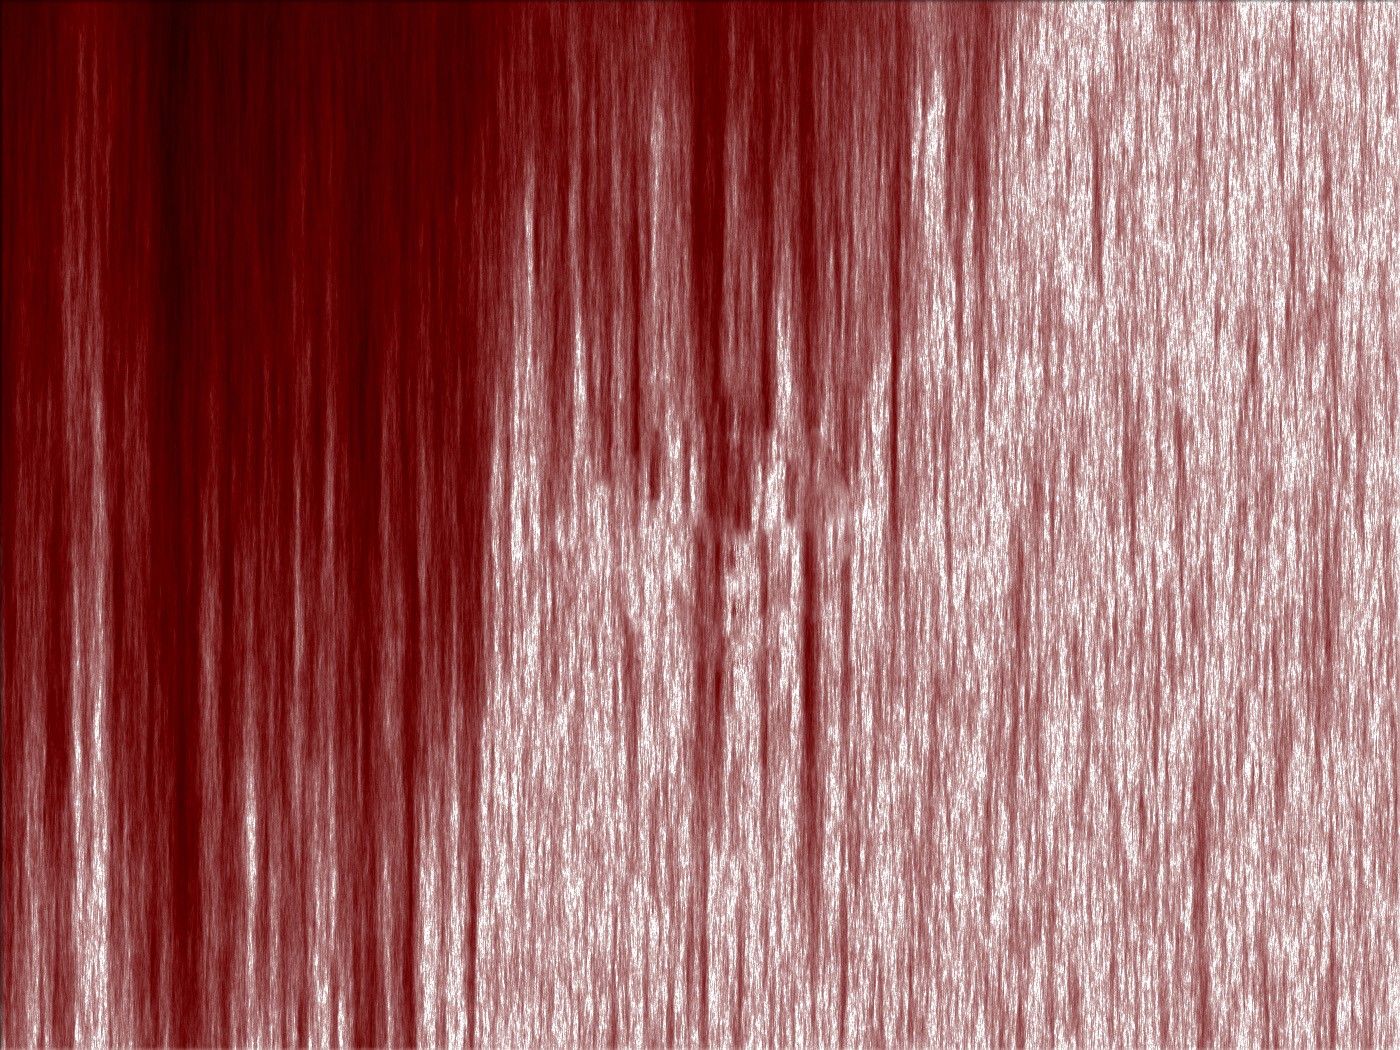 General 1400x1050 red blood texture